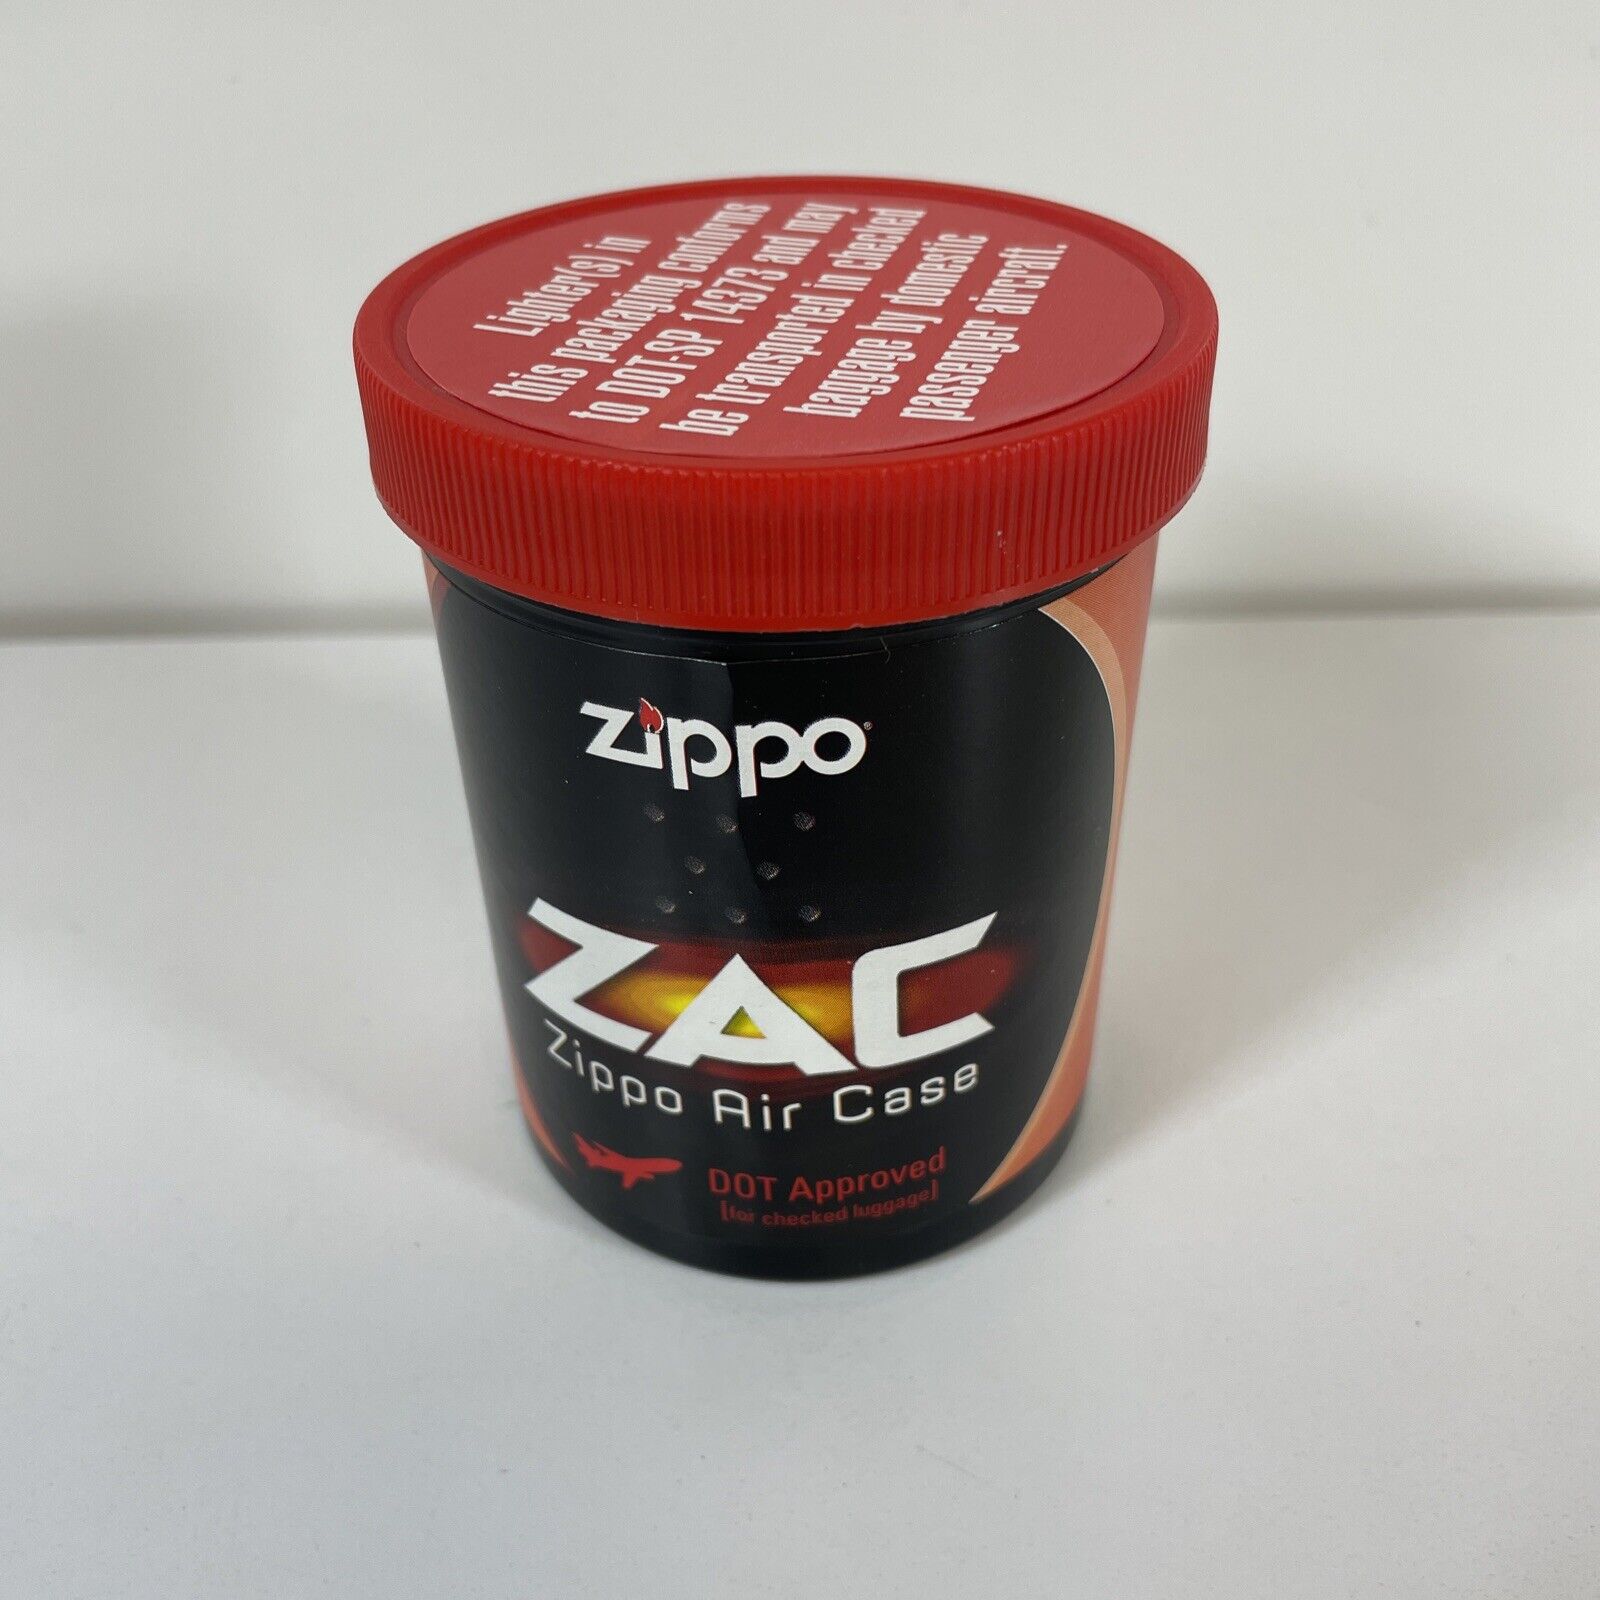 Zippo Zac Air Case DOT Approved Travel Container